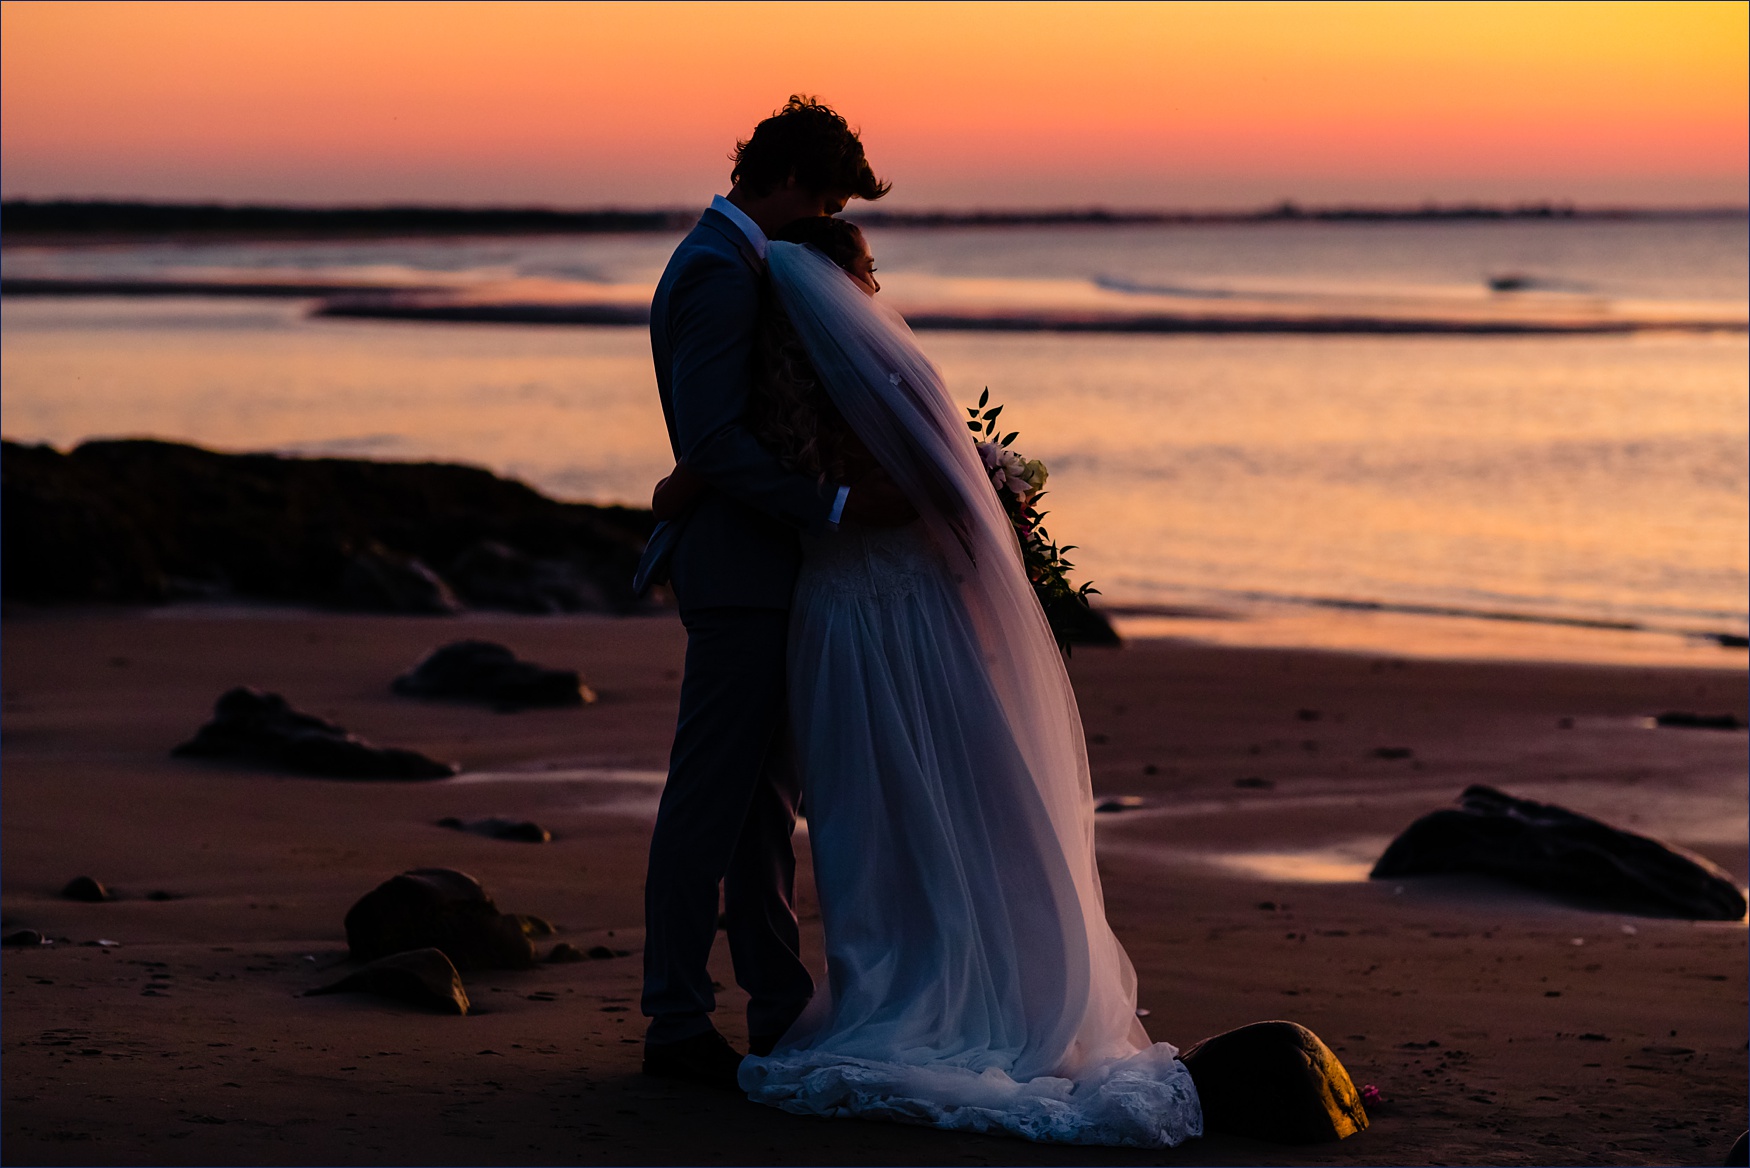 The bride and groom take in the sunrise over the ocean on their Maine elopement